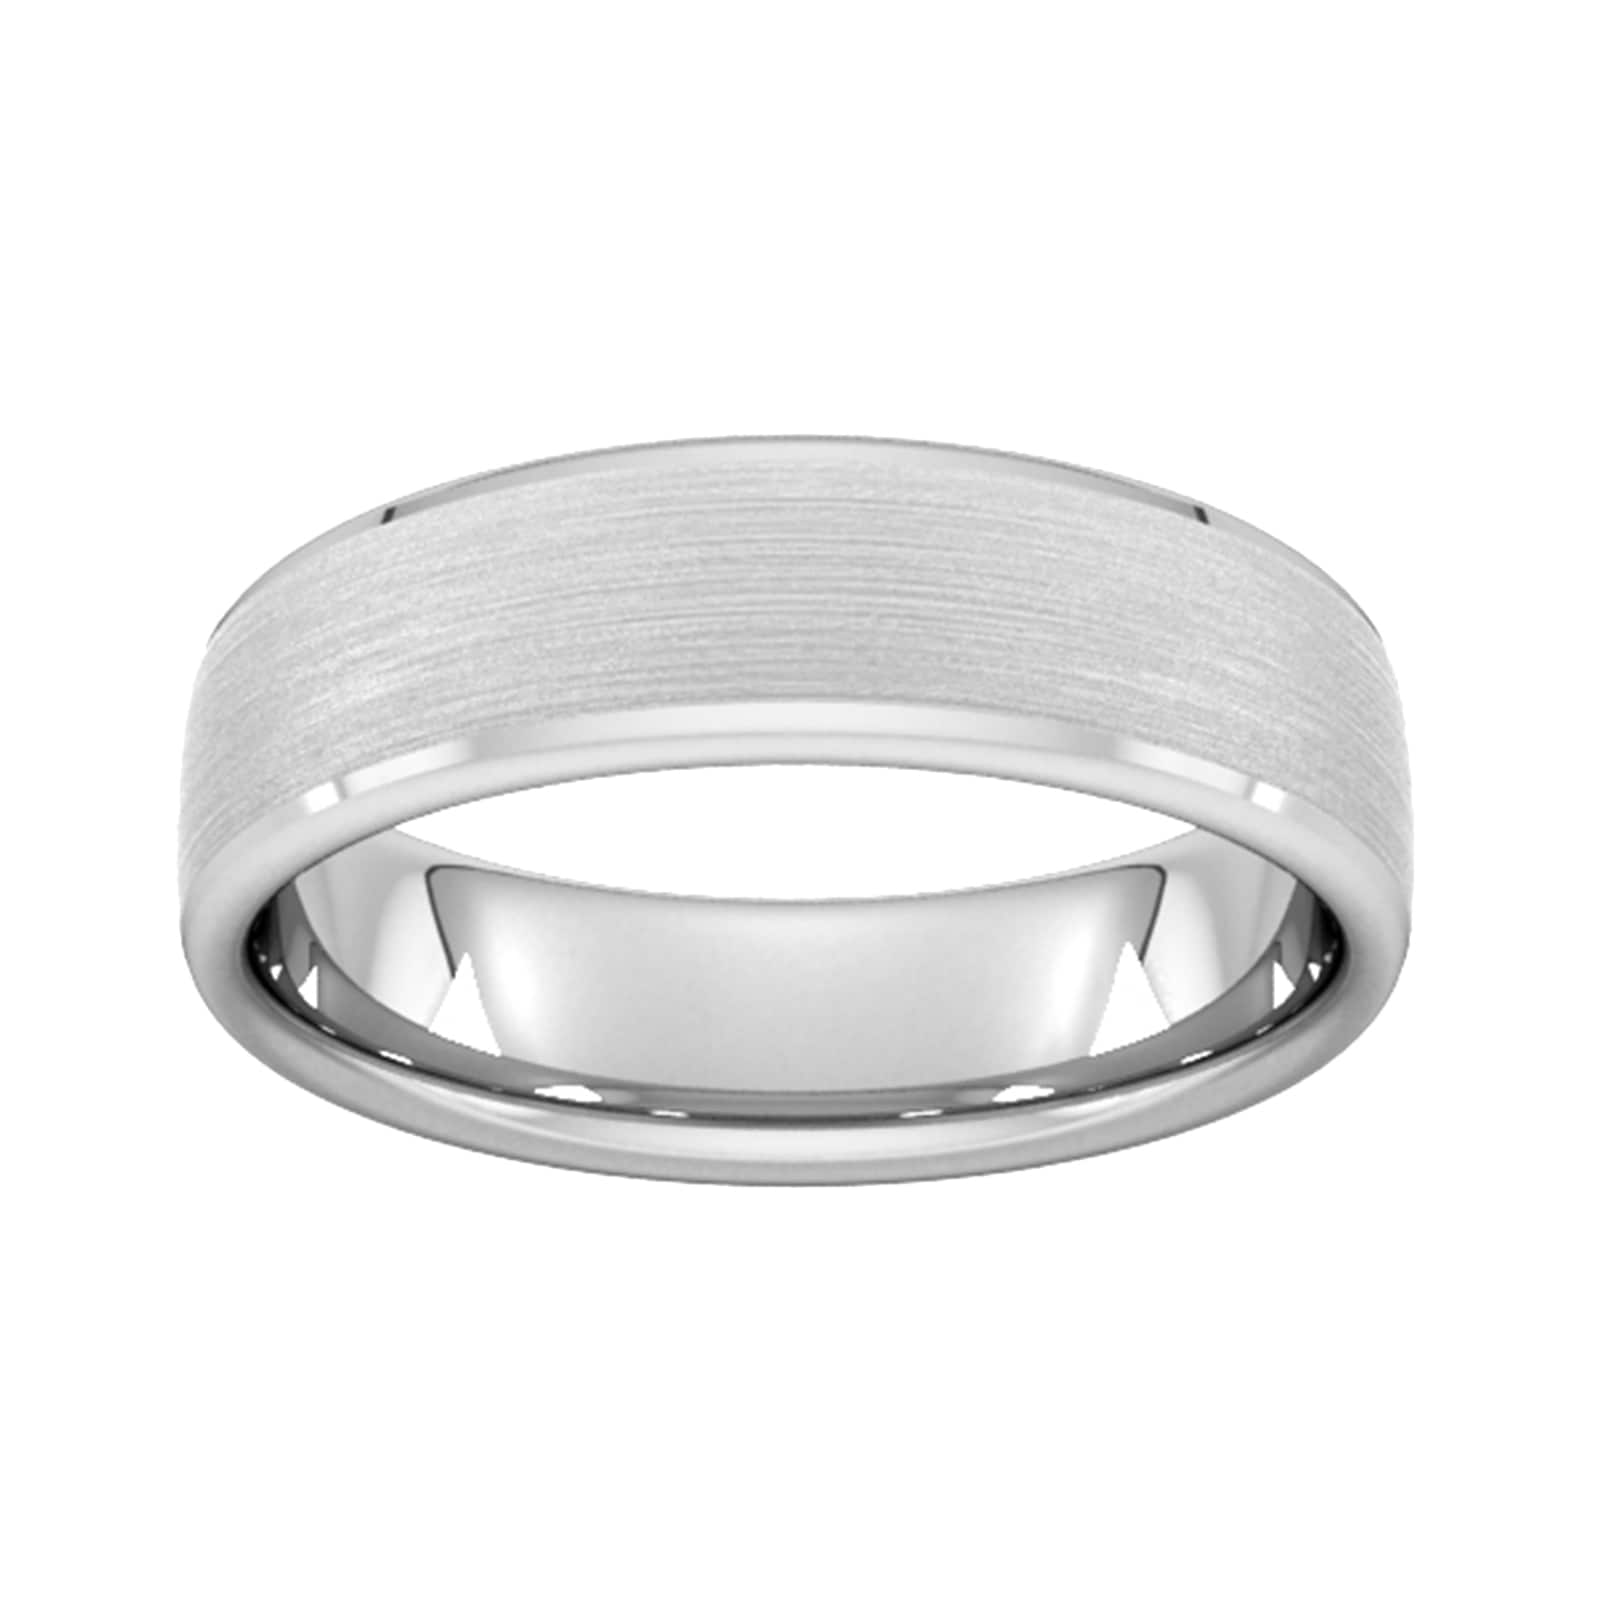 6mm Slight Court Extra Heavy Polished Chamfered Edges With Matt Centre Wedding Ring In 18 Carat White Gold - Ring Size N